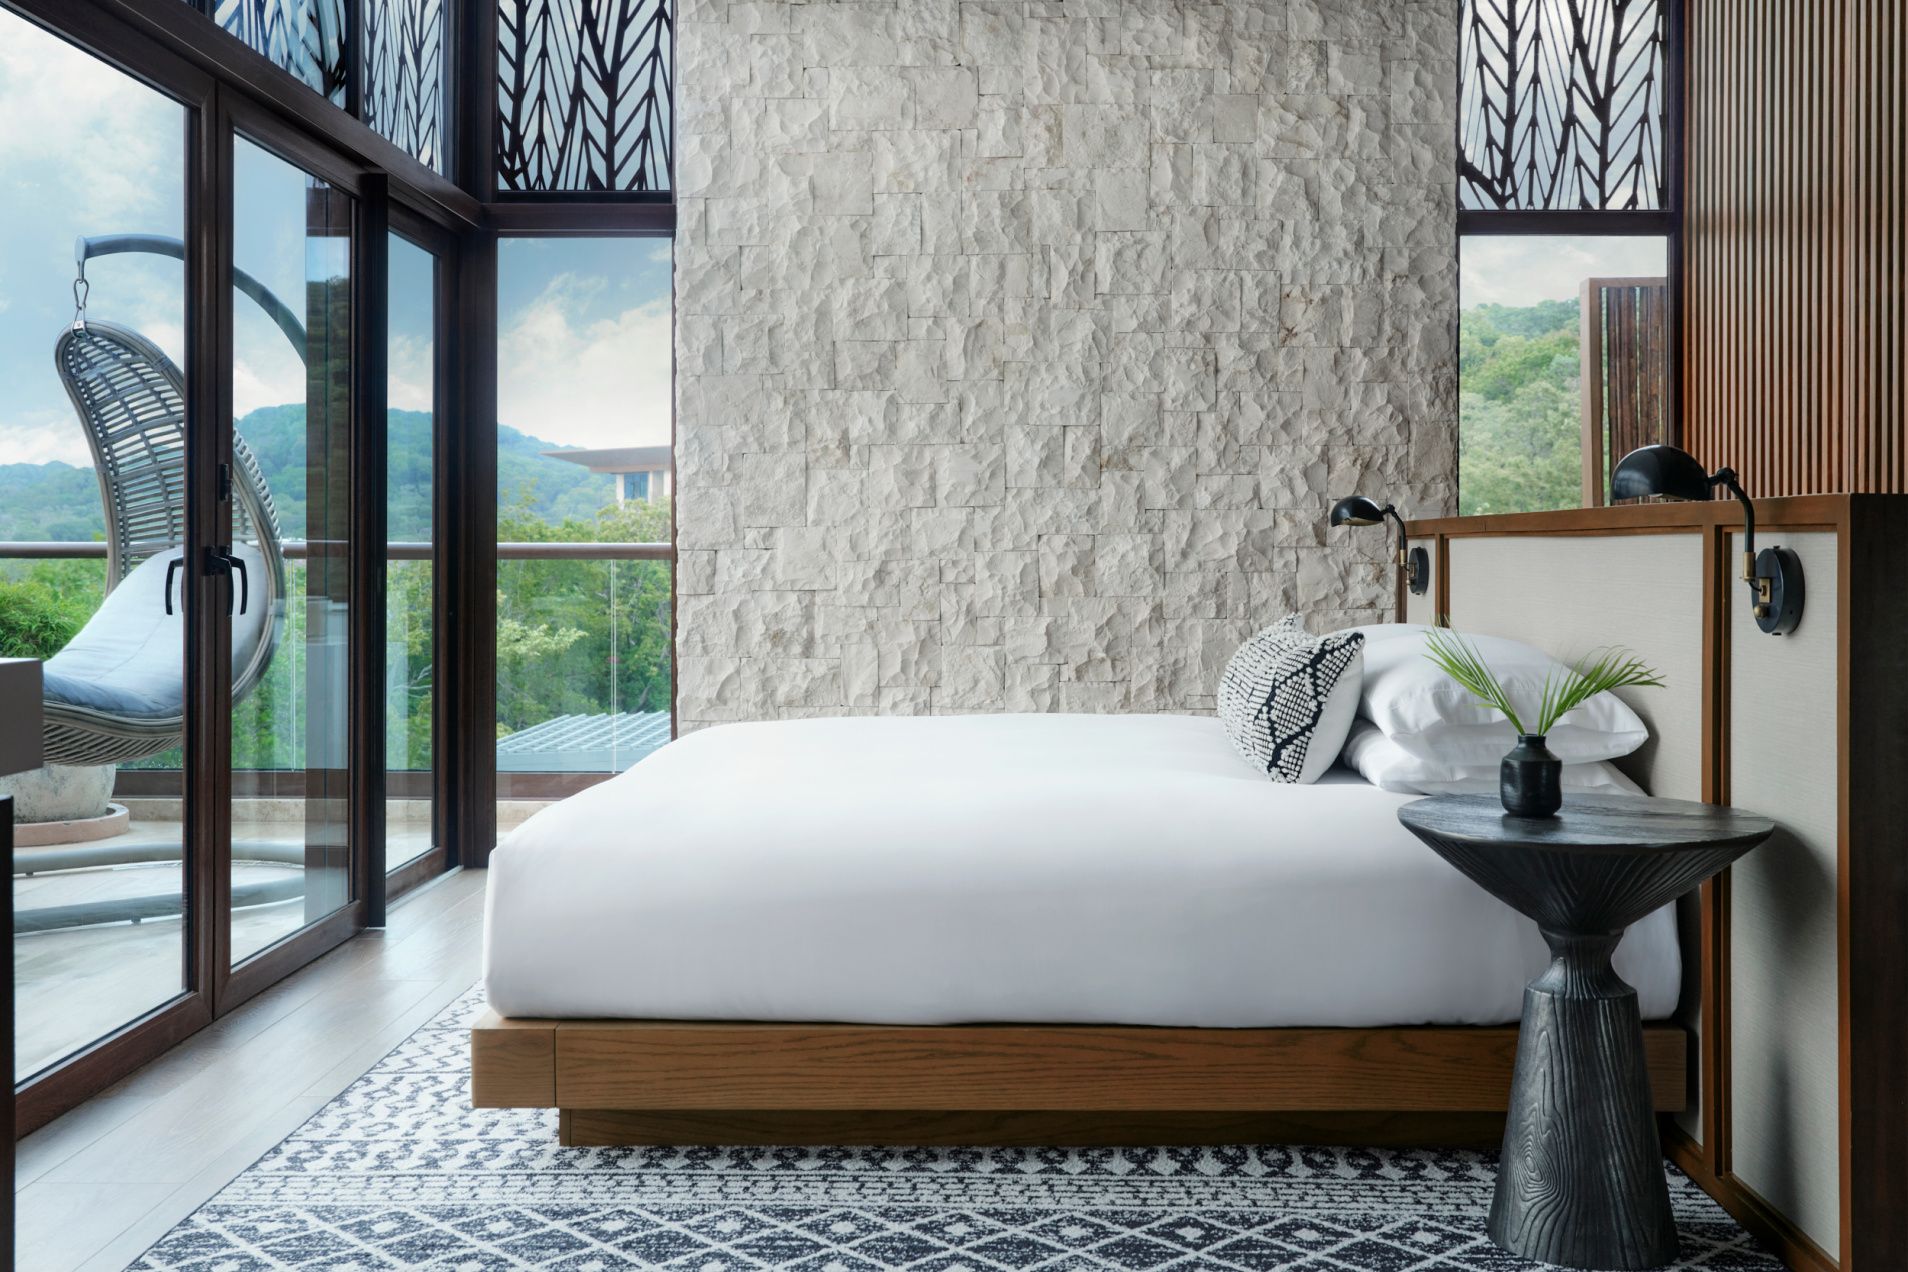 serene white bed in a corner room with views of lush island mountains and a balcony